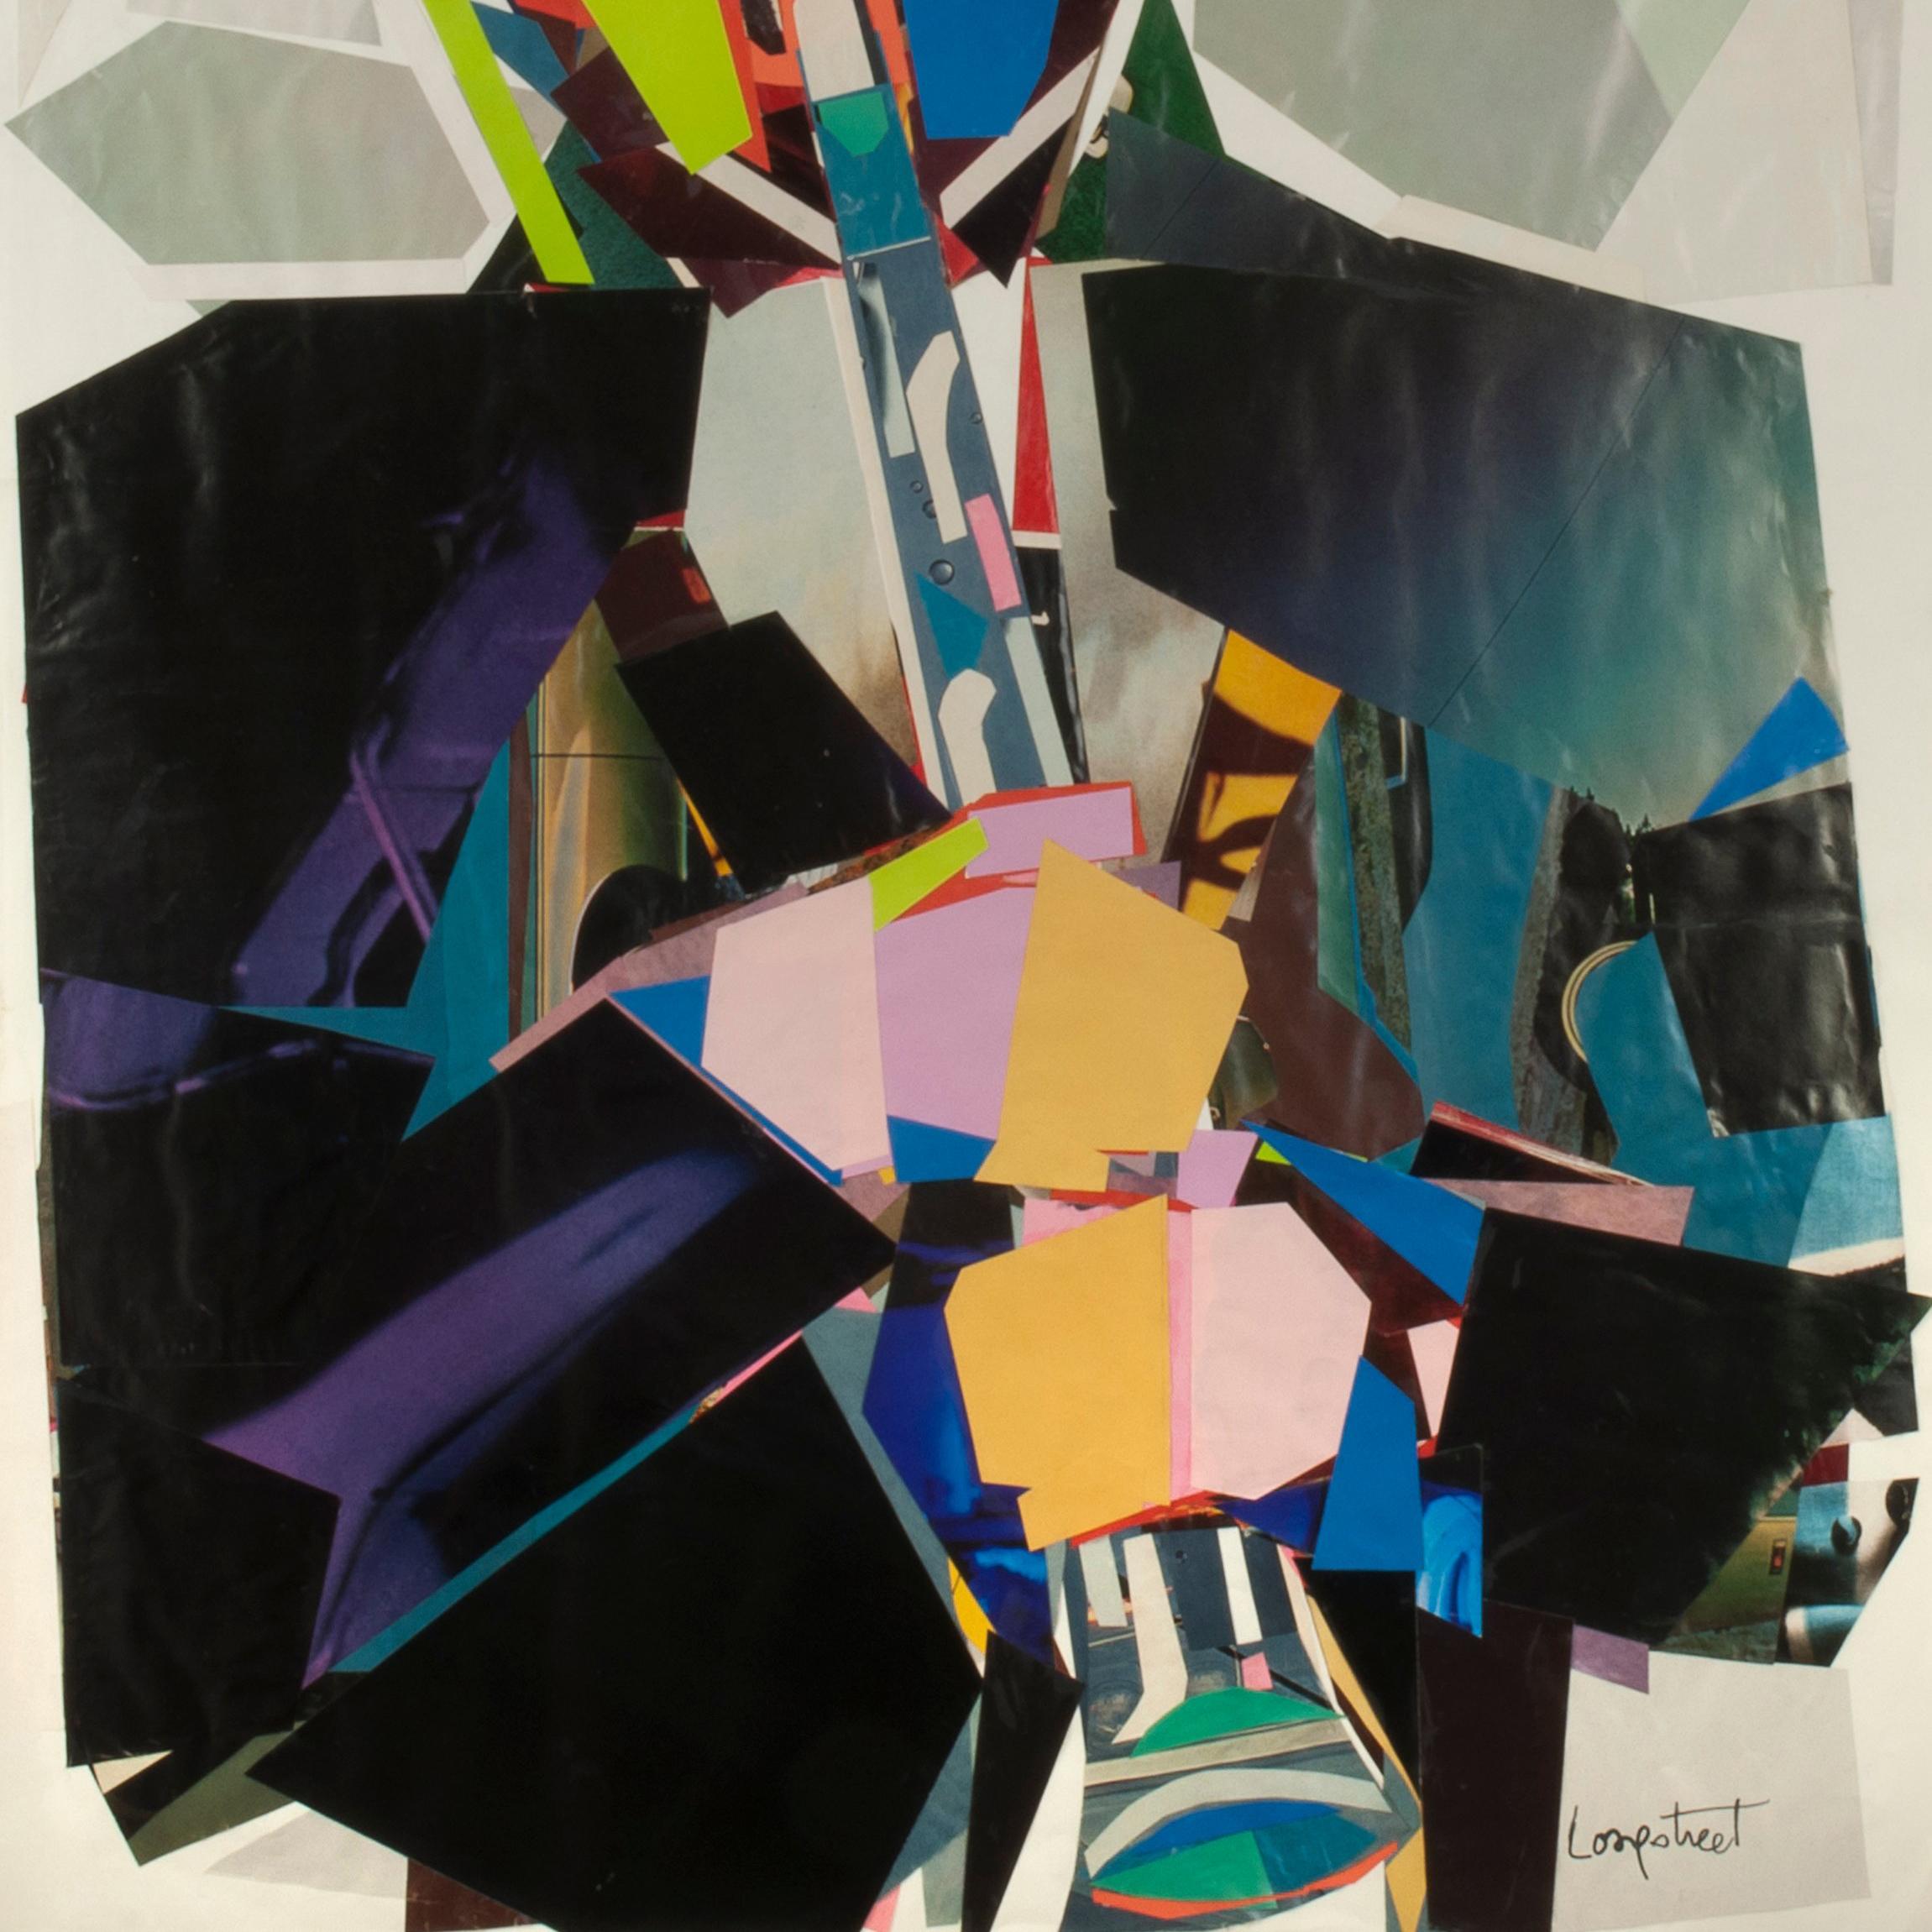 Jazz Man II
Mixed media collage on paper, 1960's
Signed in ink
Condition: Good for a collage
Image/Sheet size: 35 x 23 inches
Provenance: Acquired from the artist
                      Joseph M. Erdelac, noted Art collector, patron and
             